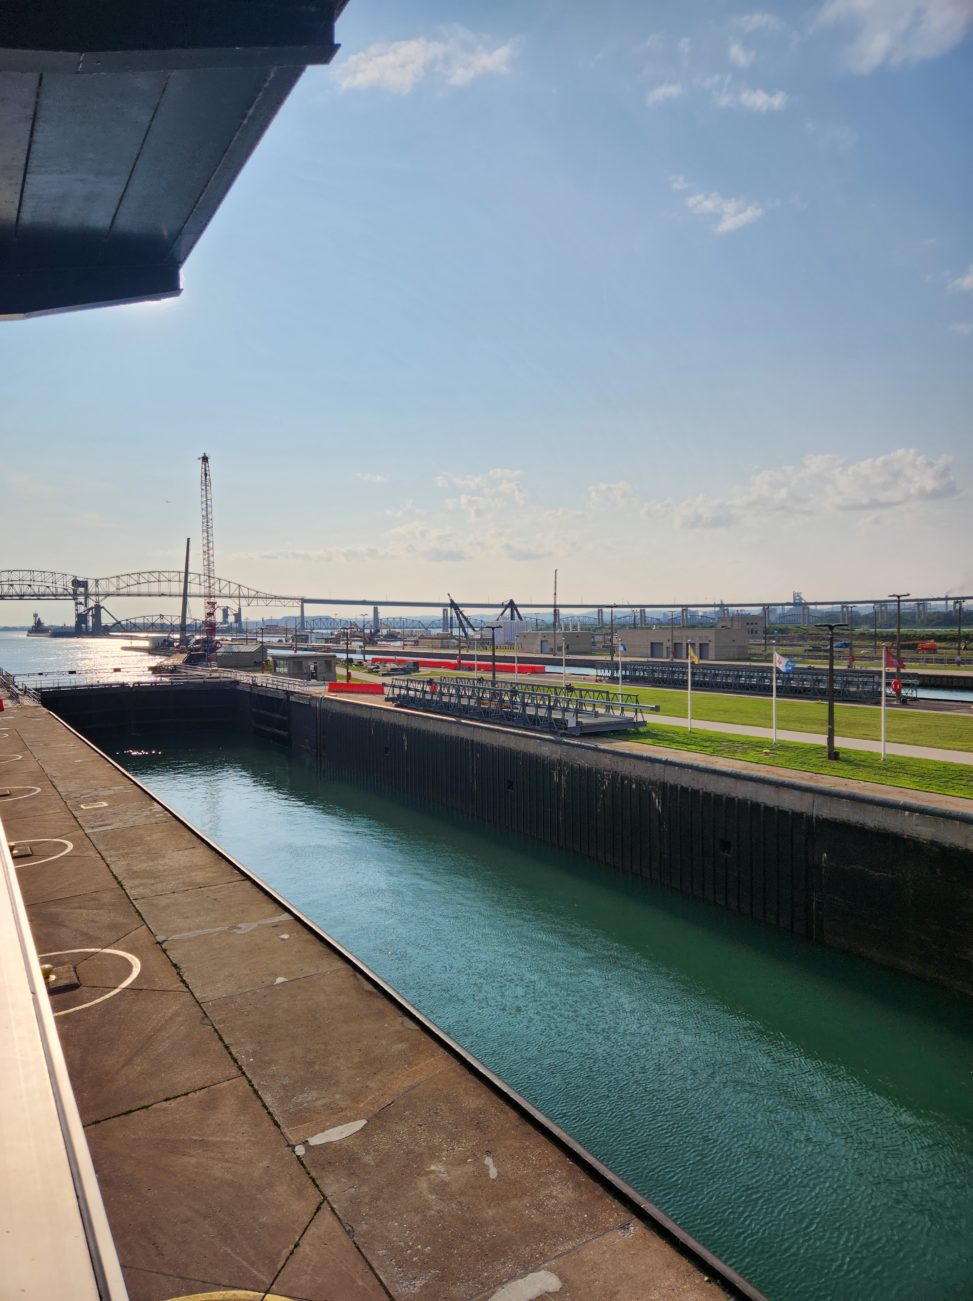 A view of the Soo Locks from the observation tower in the Soo Locks park.